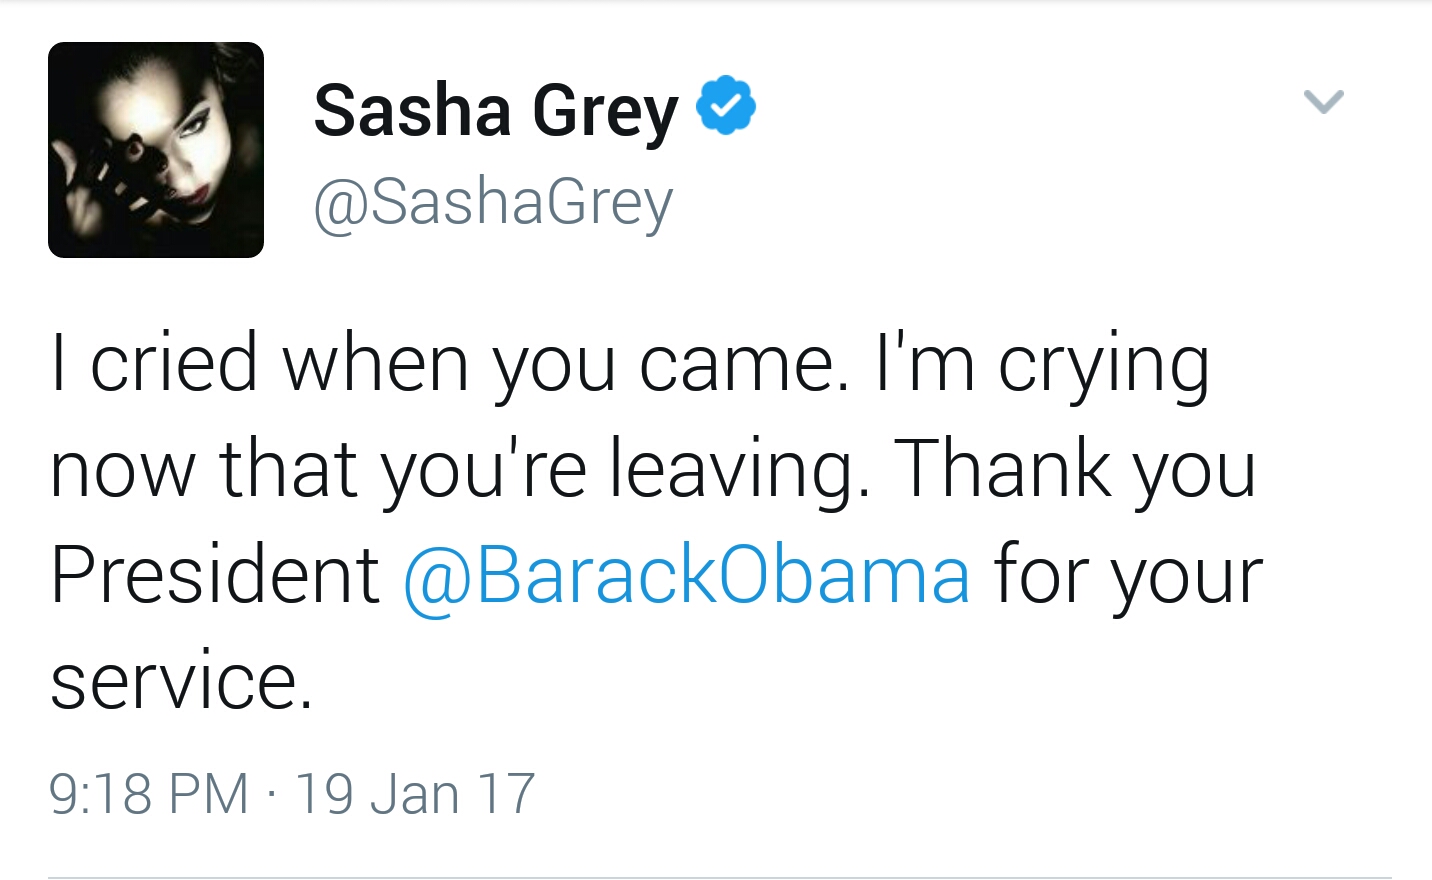 hey it's nikki blonsky from the movie hairspray - Sasha Grey Grey I cried when you came. I'm crying now that you're leaving. Thank you President for your service. 19 Jan 17